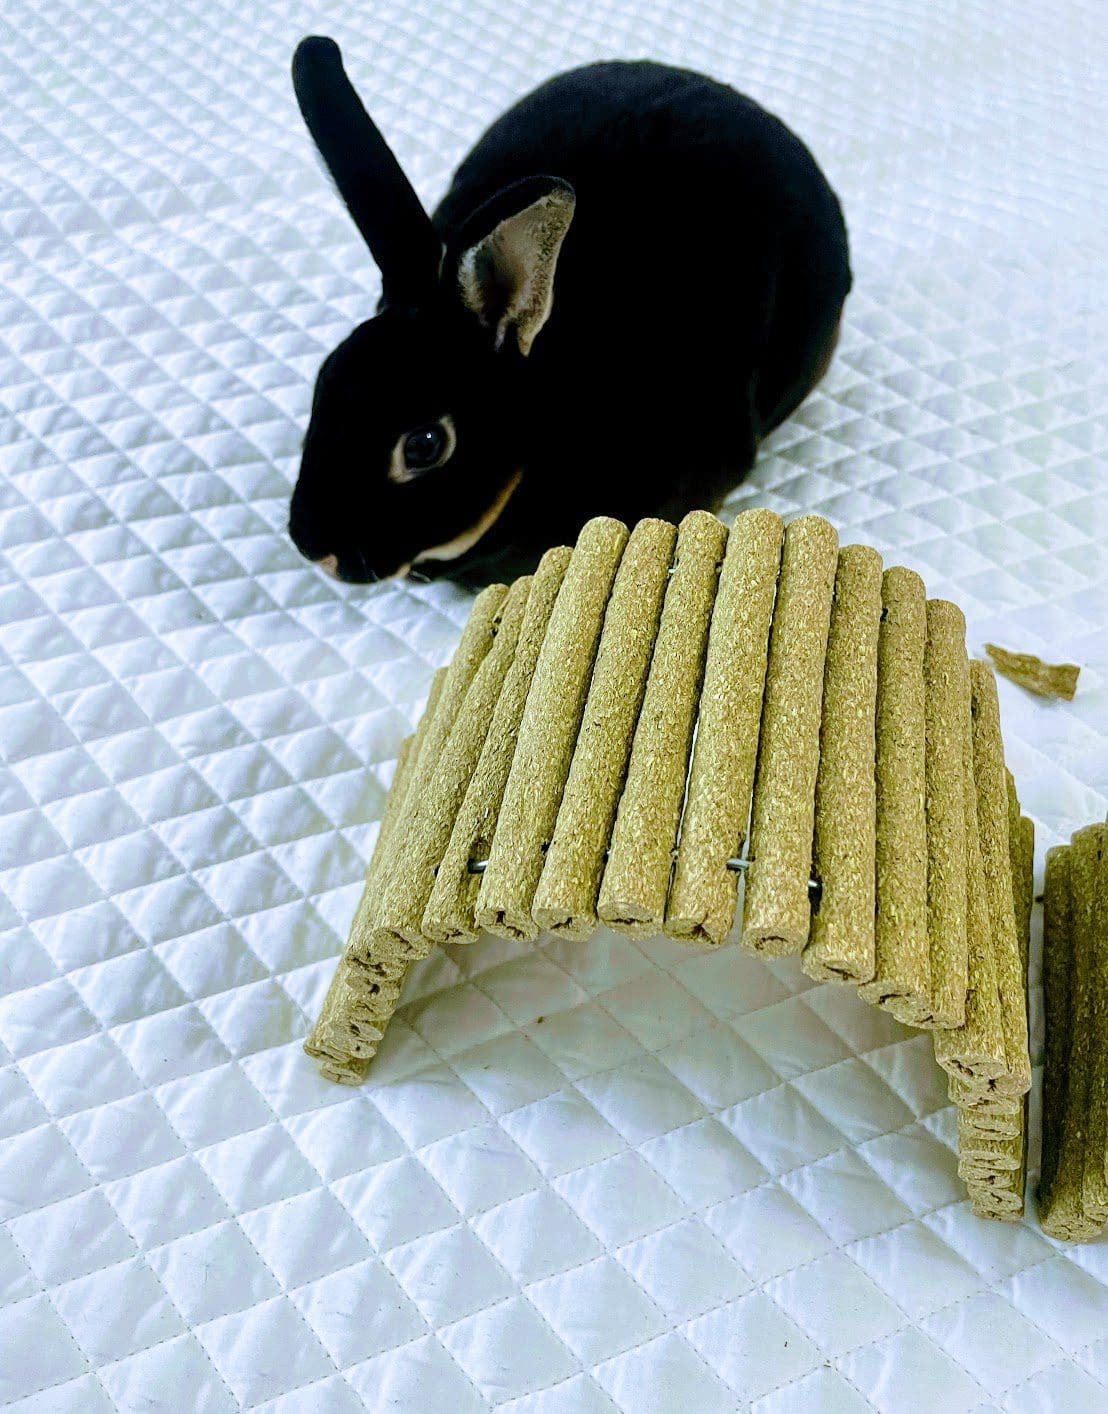 Hay Bendable Bridge Treat and Chew Toy For Rabbits, Hamsters, Guinea Pigs, Chinchillas and Small Rodents.